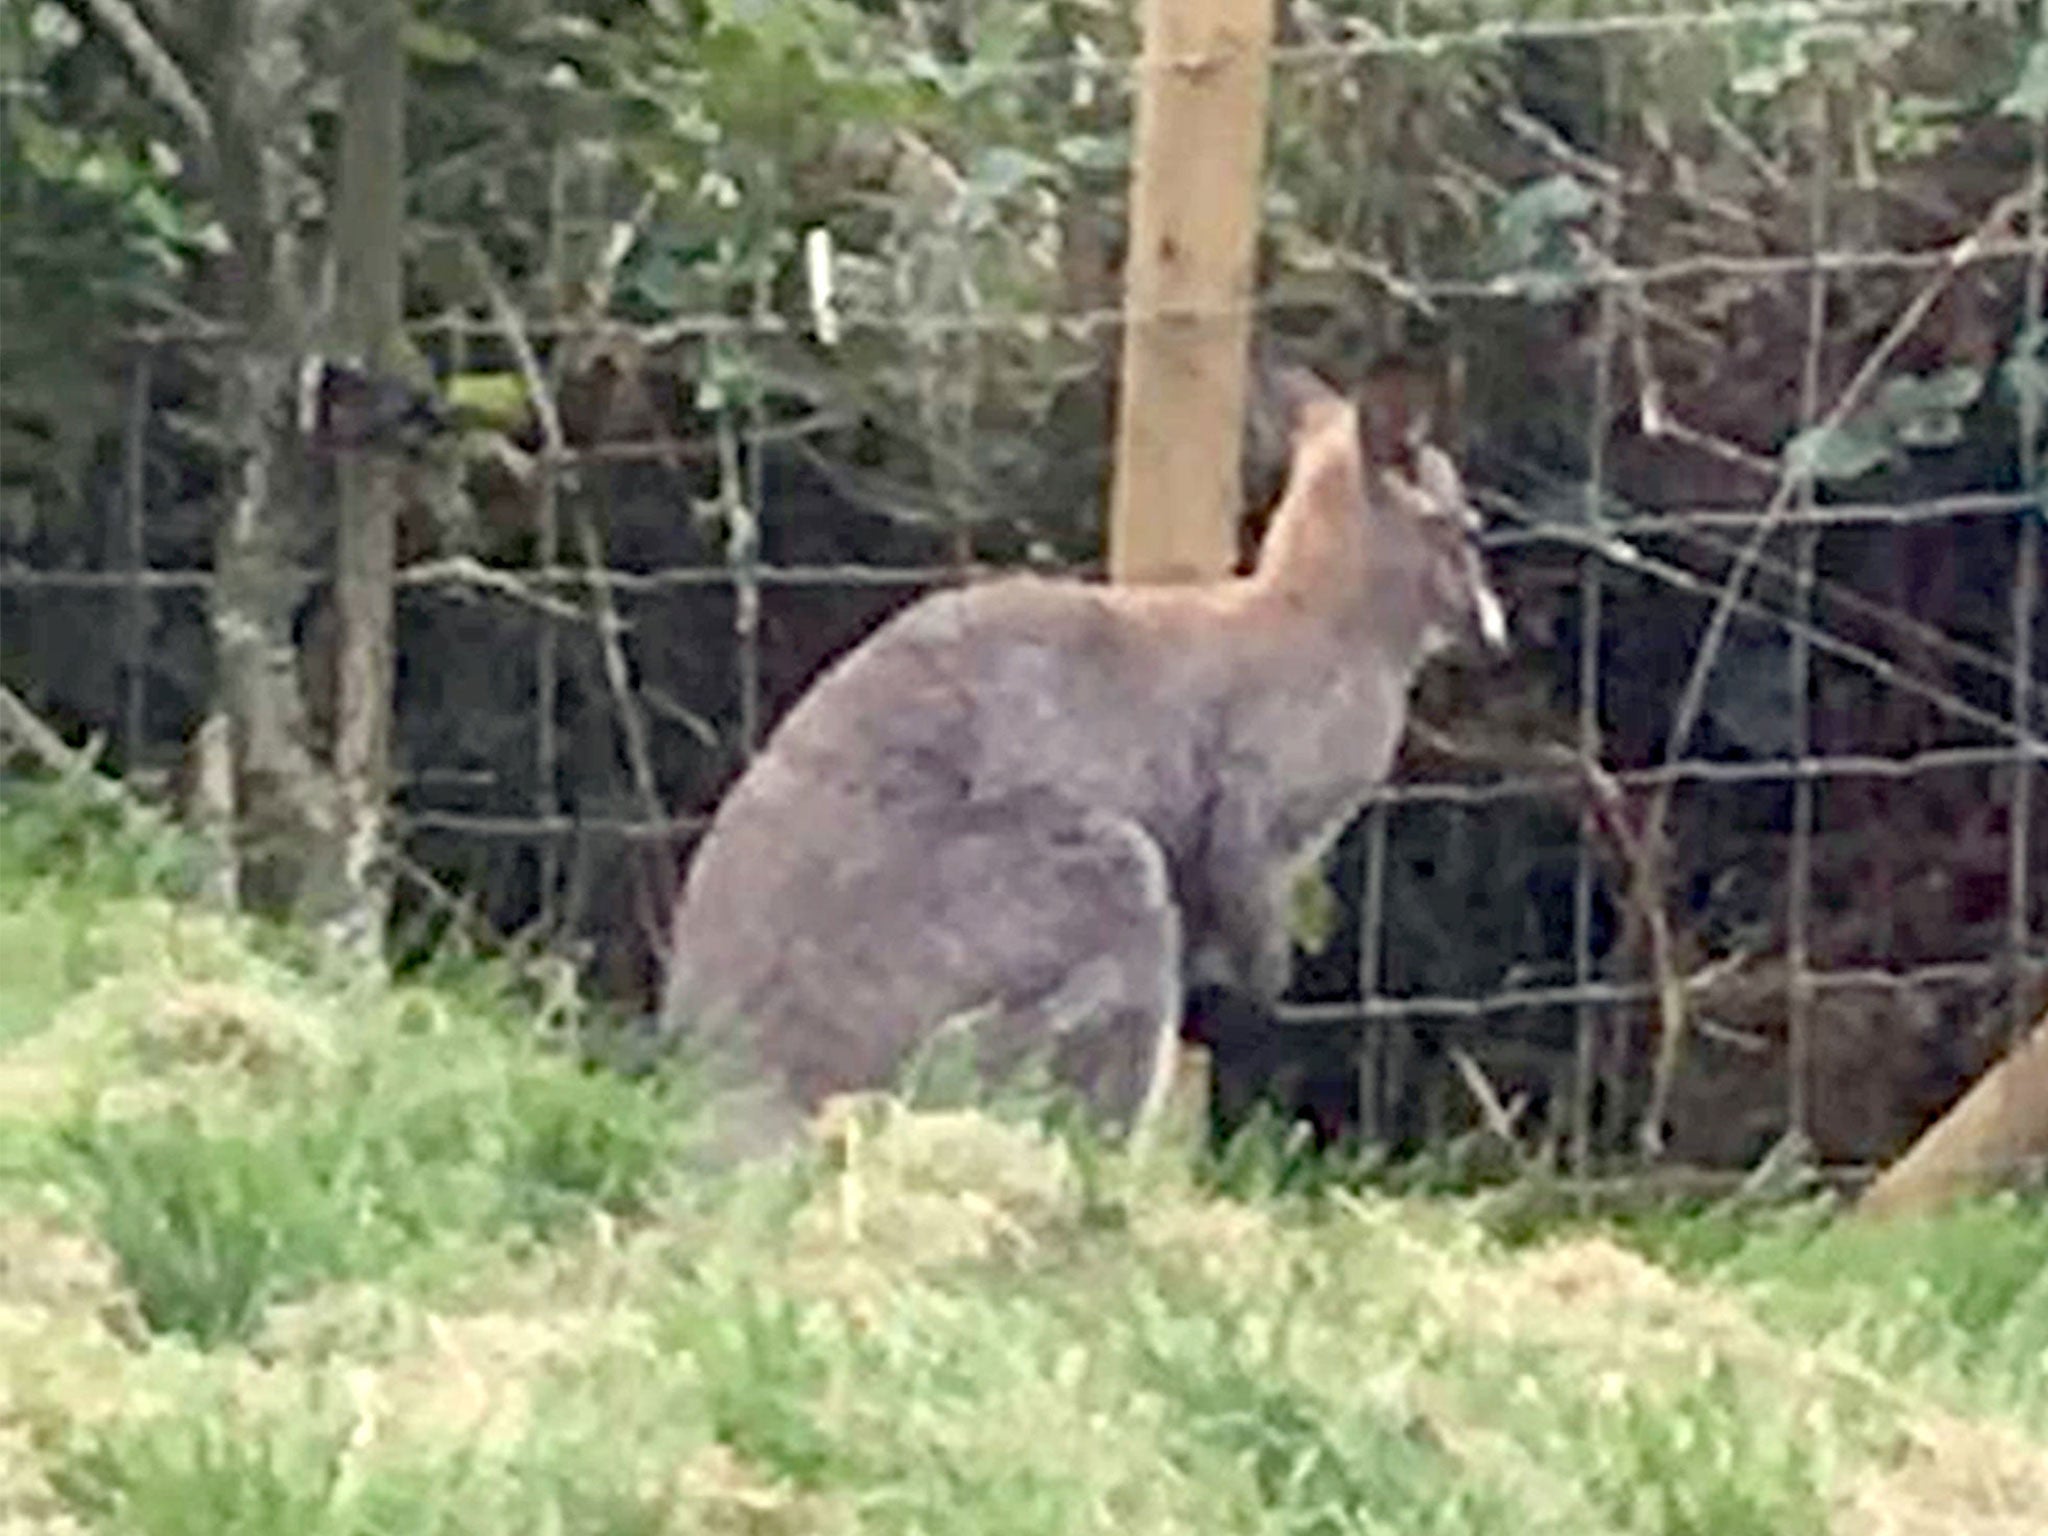 The wallaby was at the wildlife park for a matter of hours before it disappeared